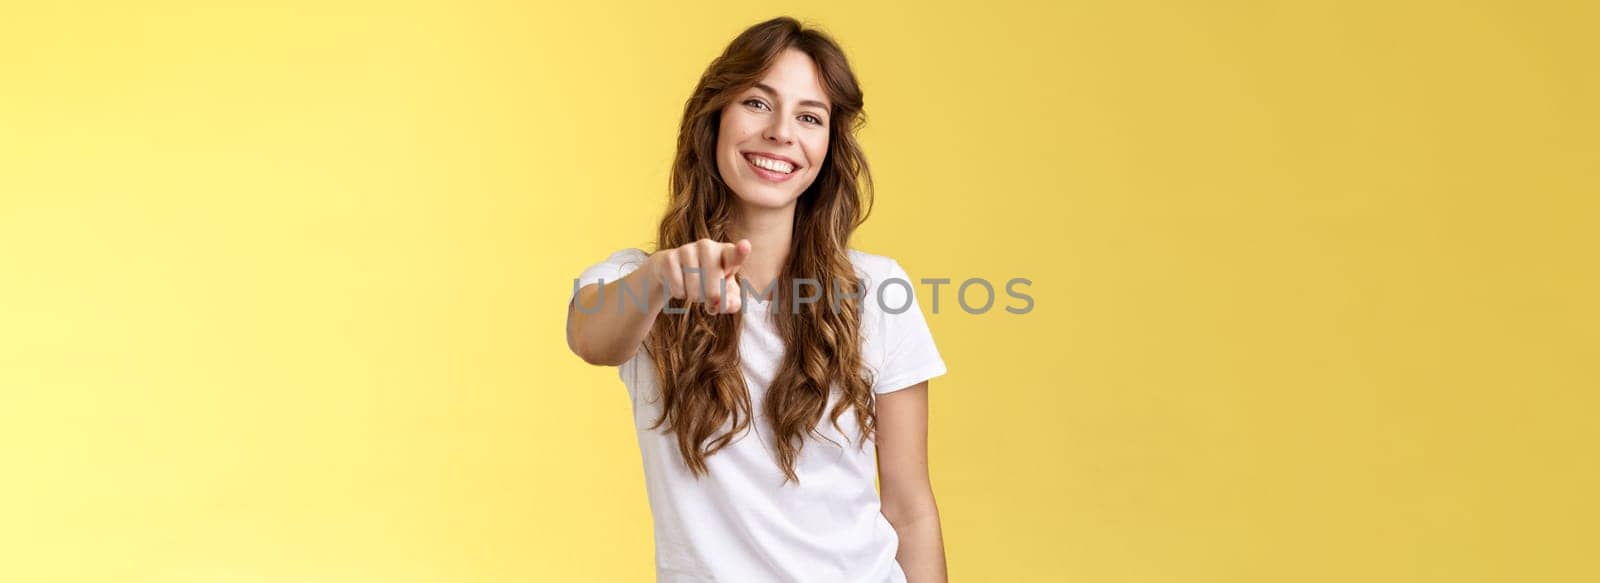 Only you. Friendly cheerful good-looking curly-haired girl picking join team found excellent candidate pointing camera extend index finger indicating forward smiling delighted made perfect choice by Benzoix